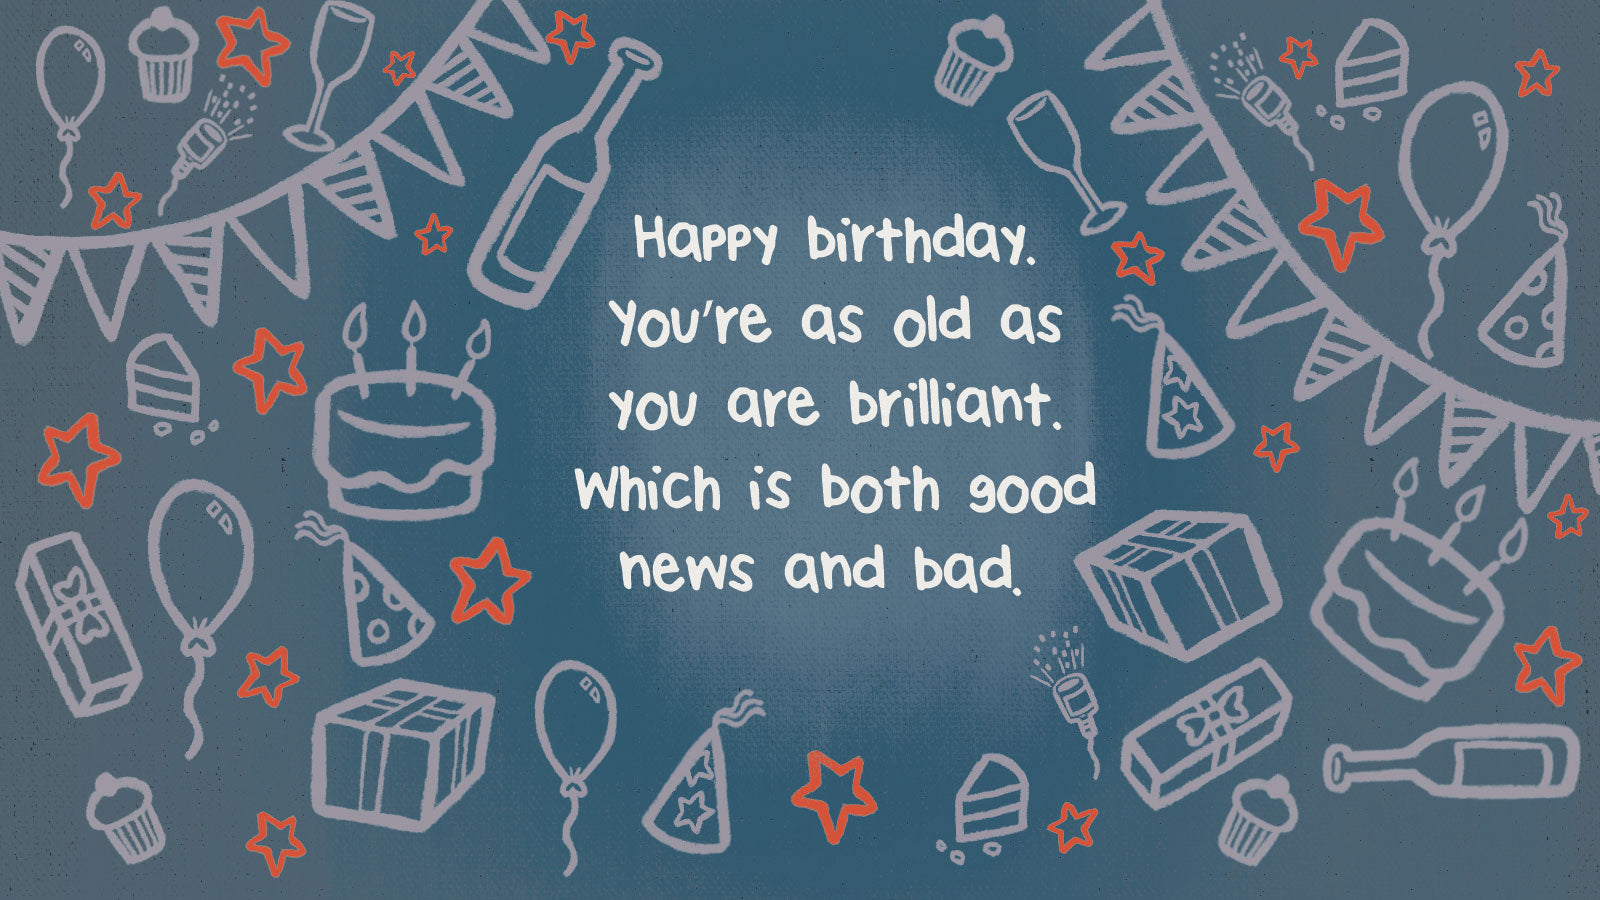 funny birthday jokes for adults